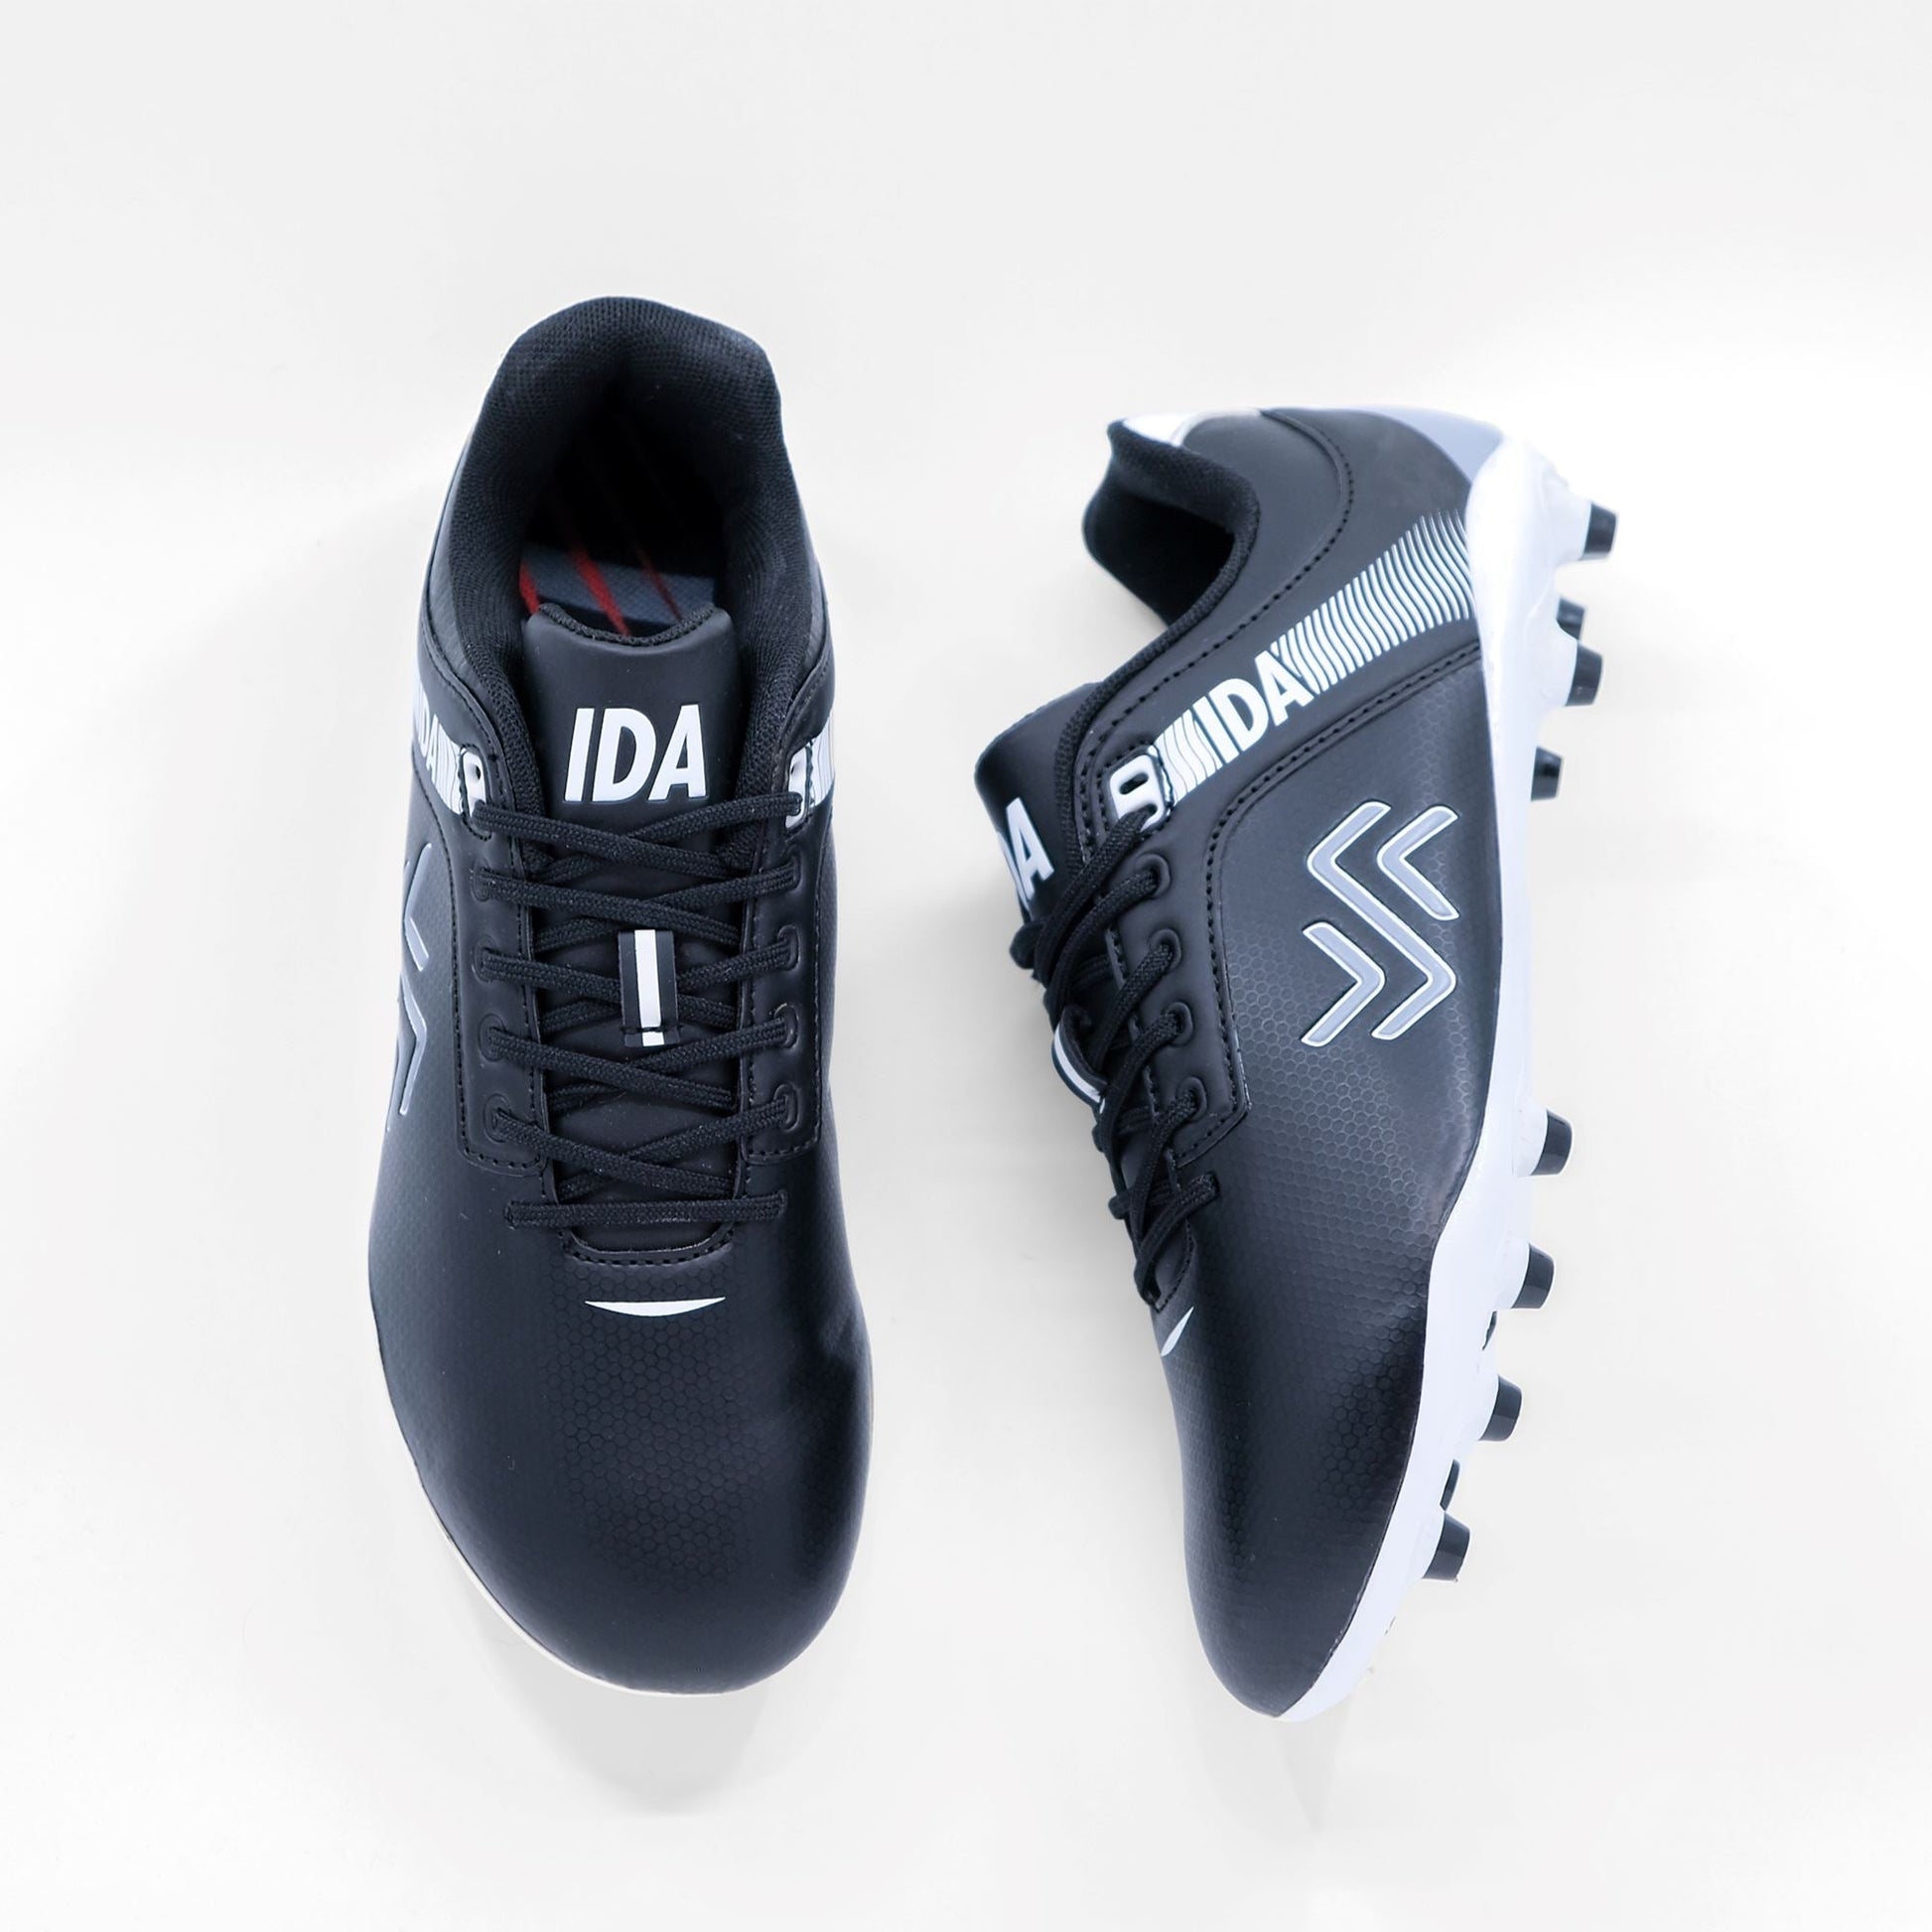 IDA Centra Women's Soccer Cleat, Black, FG/AG, Firm Ground, Artificial Ground